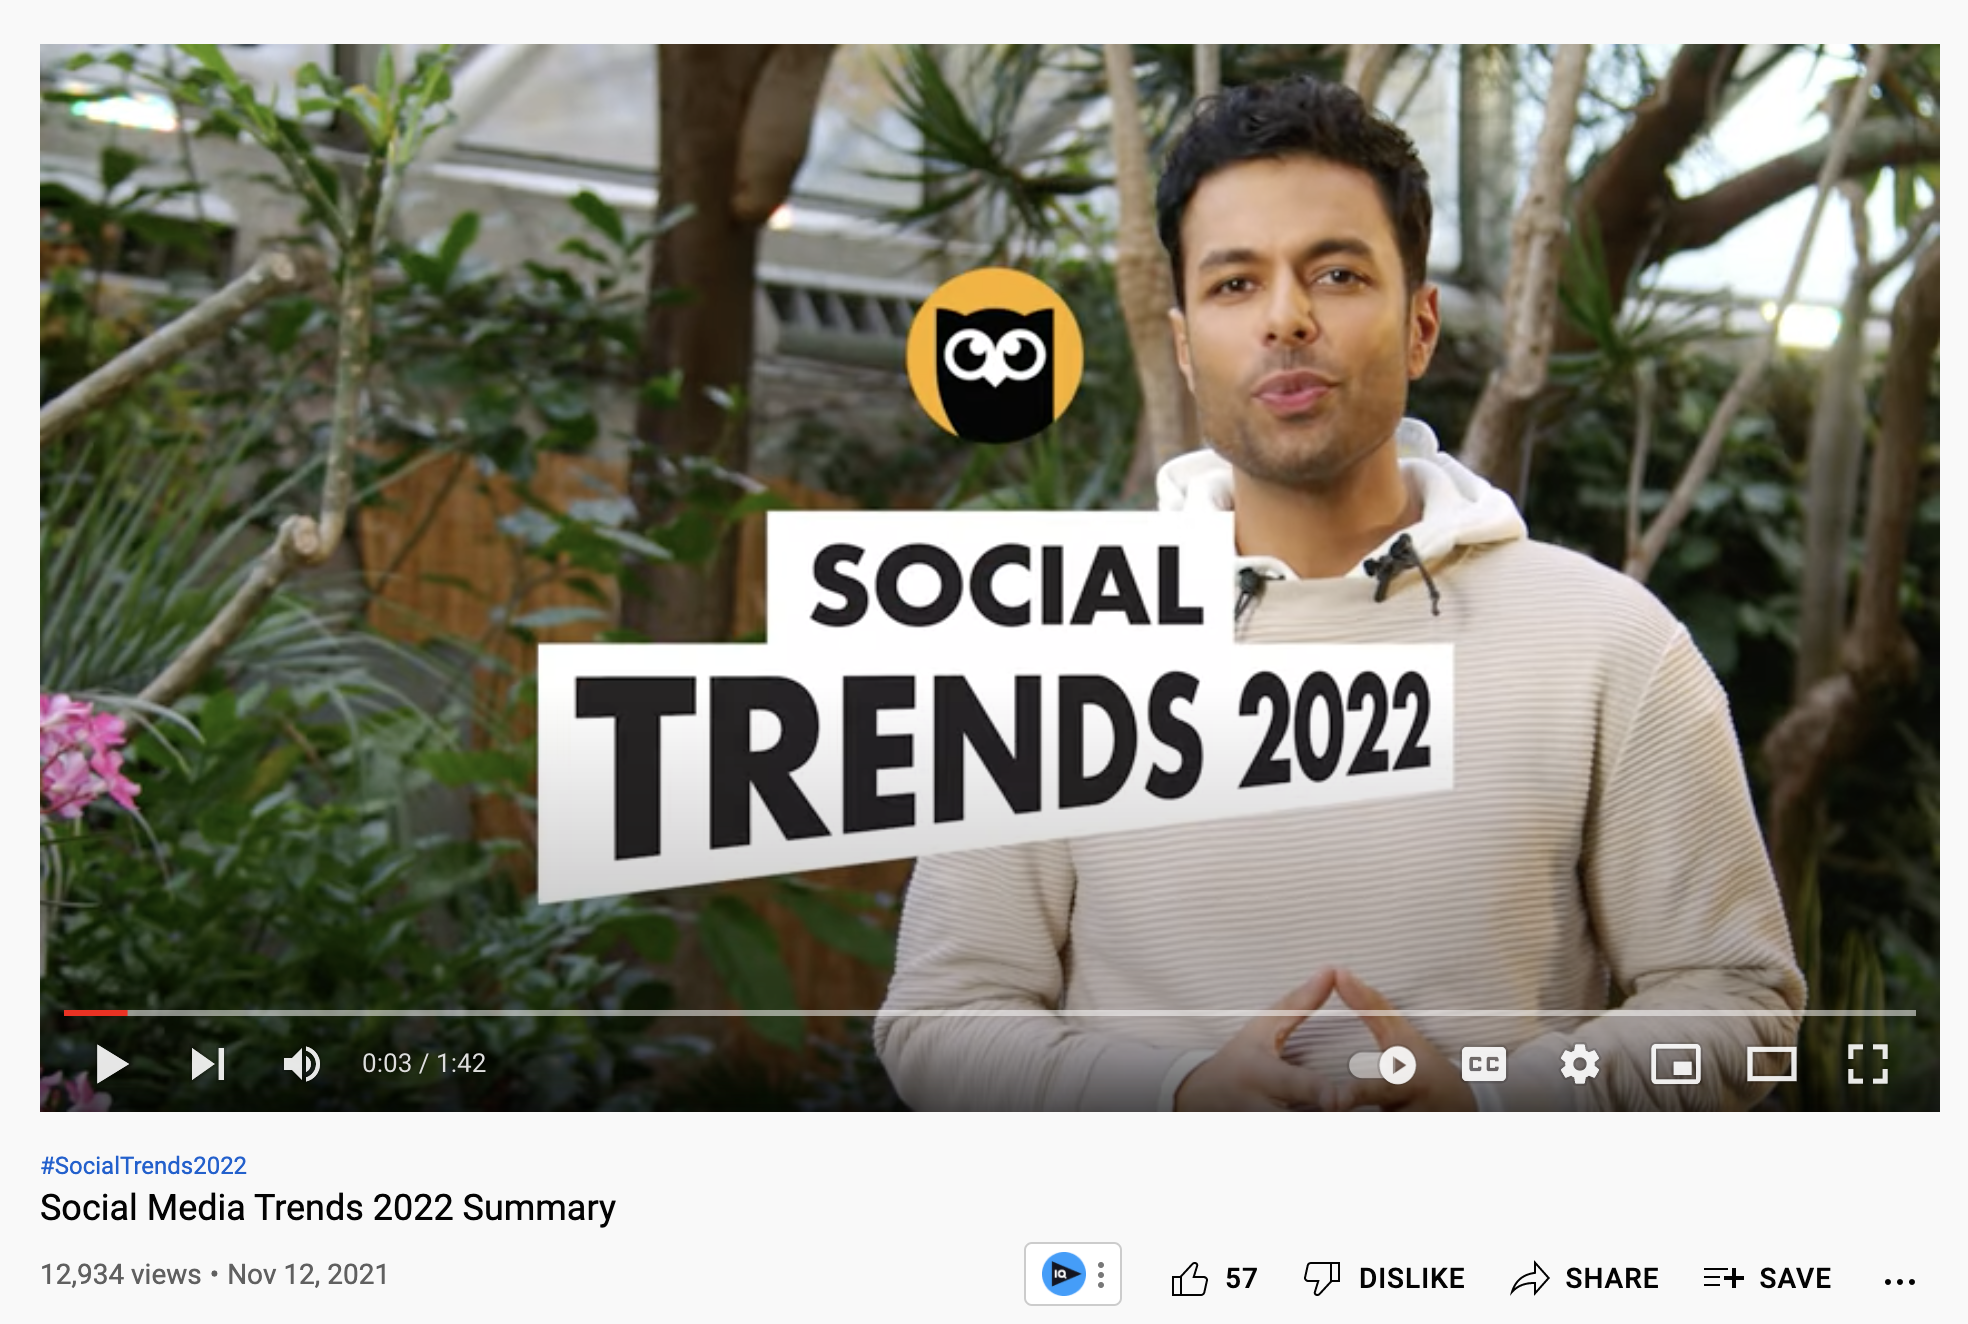 Social Trends 2022 YouTube video